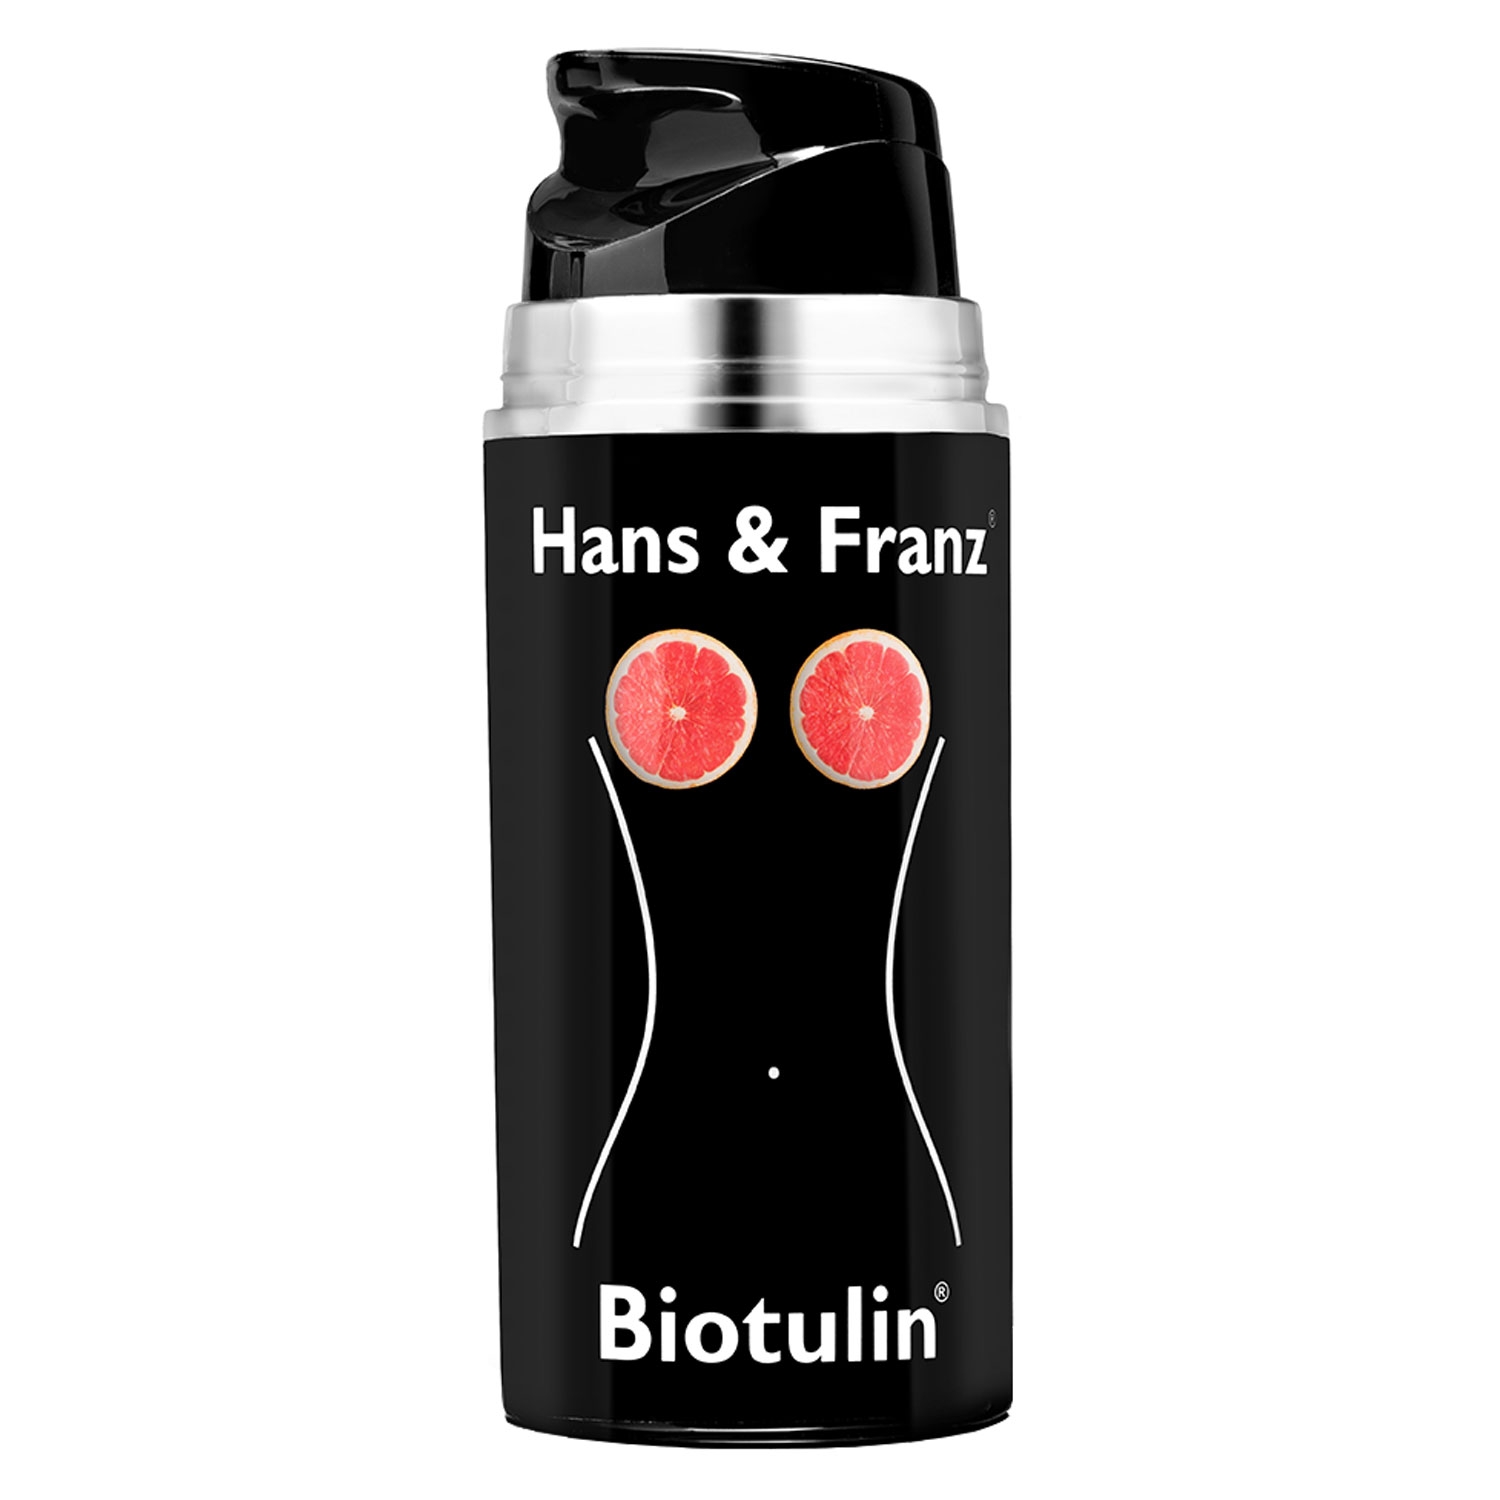 Product image from Biotulin - Hans & Franz